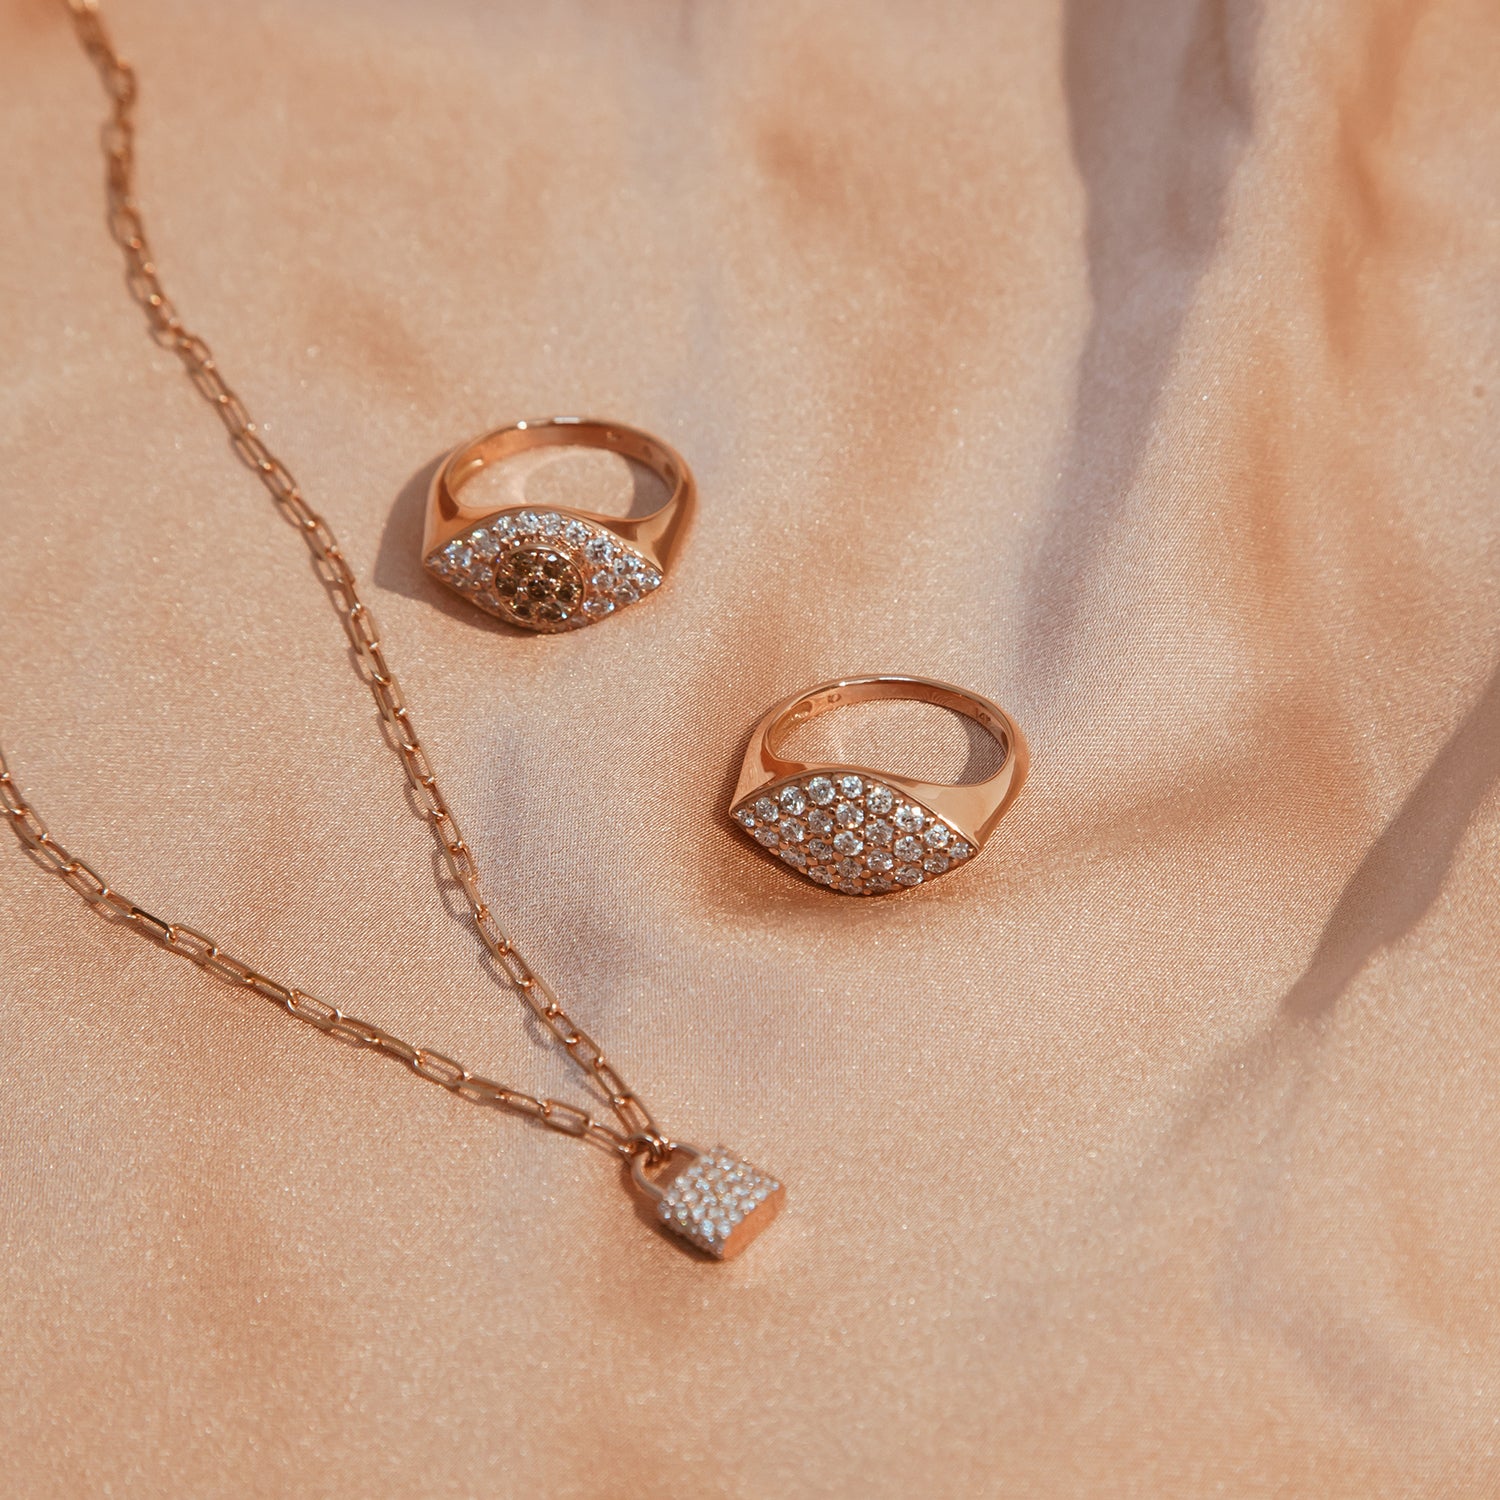 The Padlock Necklace shown with the Gemma Ring and Drishti Ring.